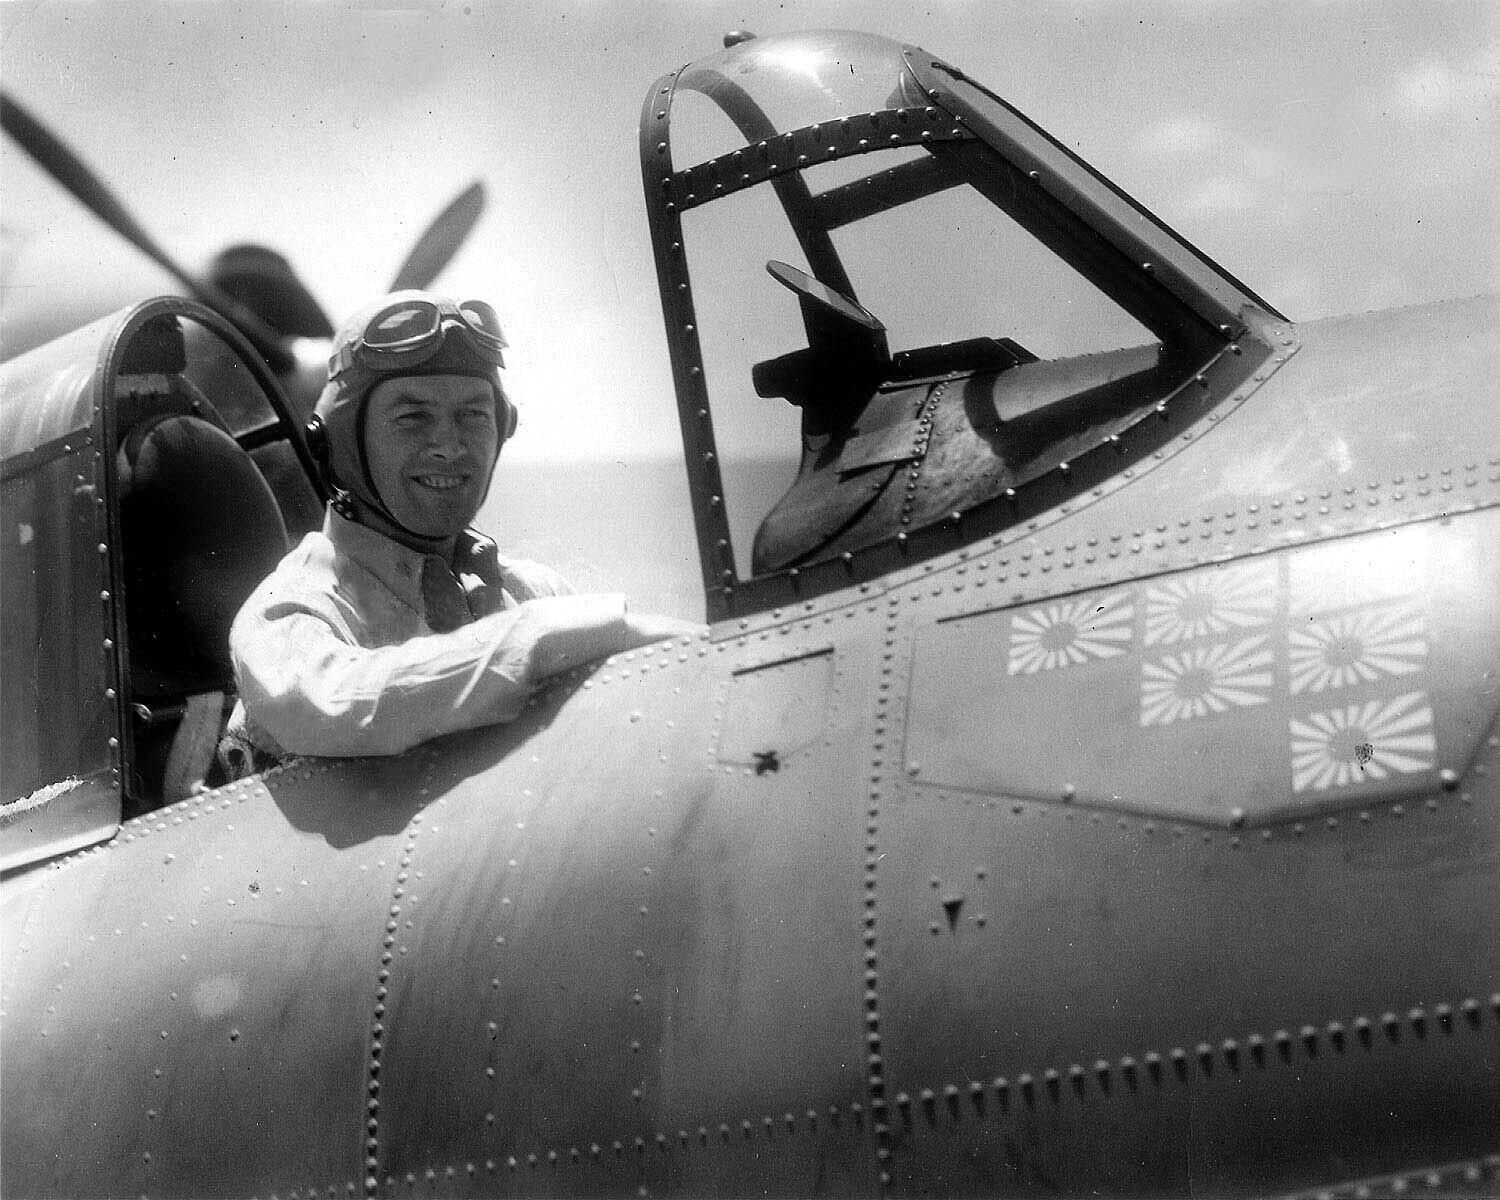 Primary Image of James H. Flatley Jr. in the Cockpit of his F4F-4 Wildcat